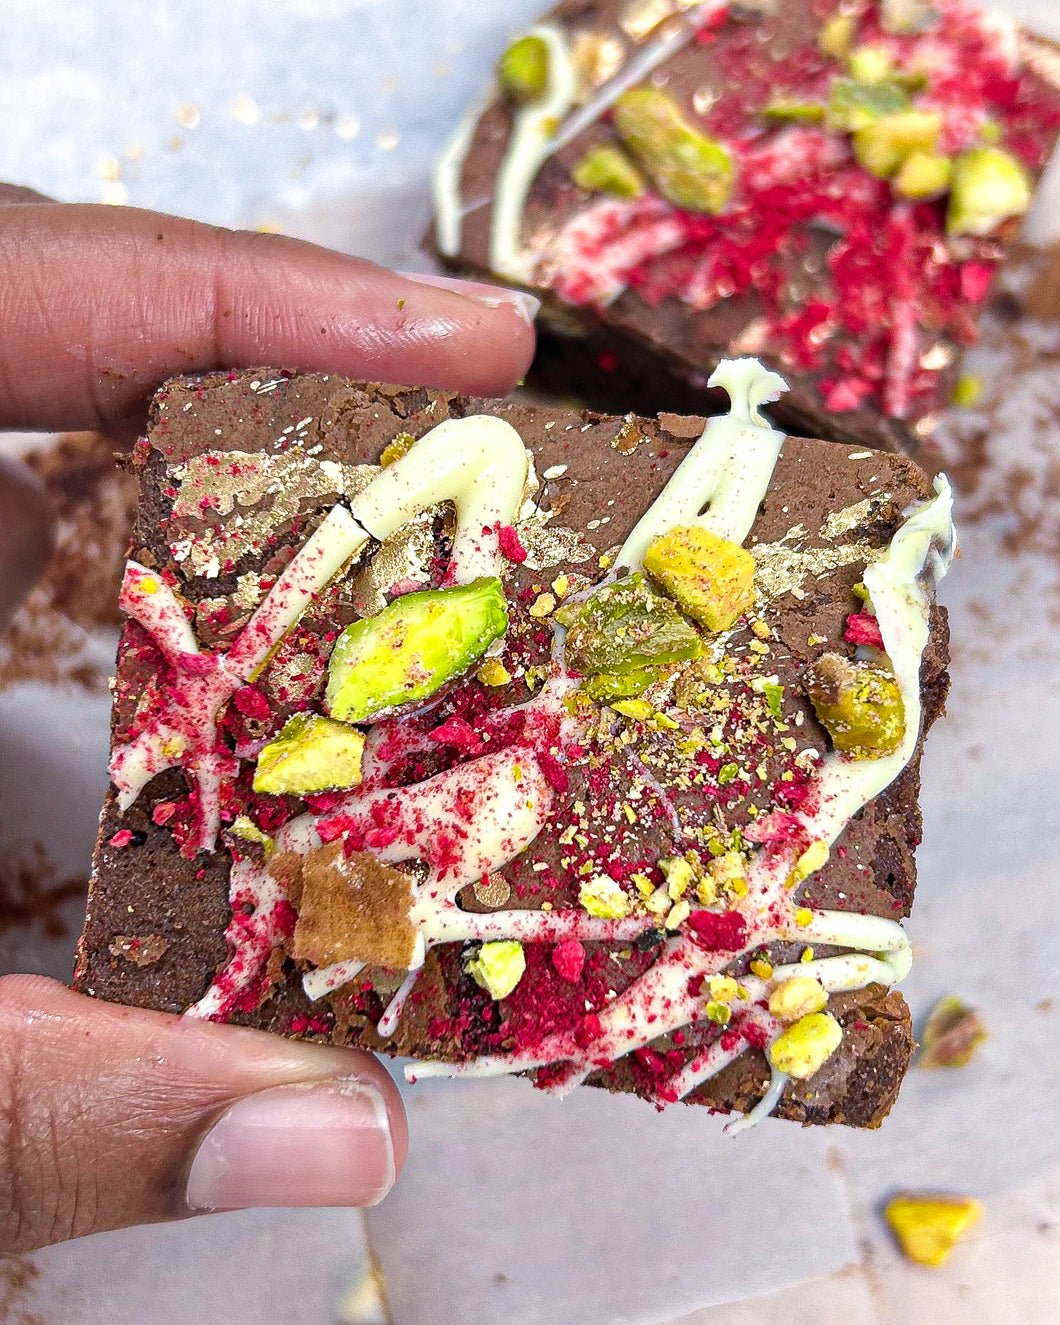 Picture of a hand holding up Dark chocolate brownies infused with rose water & white chocolate pieces adorned with white chocolate, crushed pistachios and freeze dried raspberries Media  